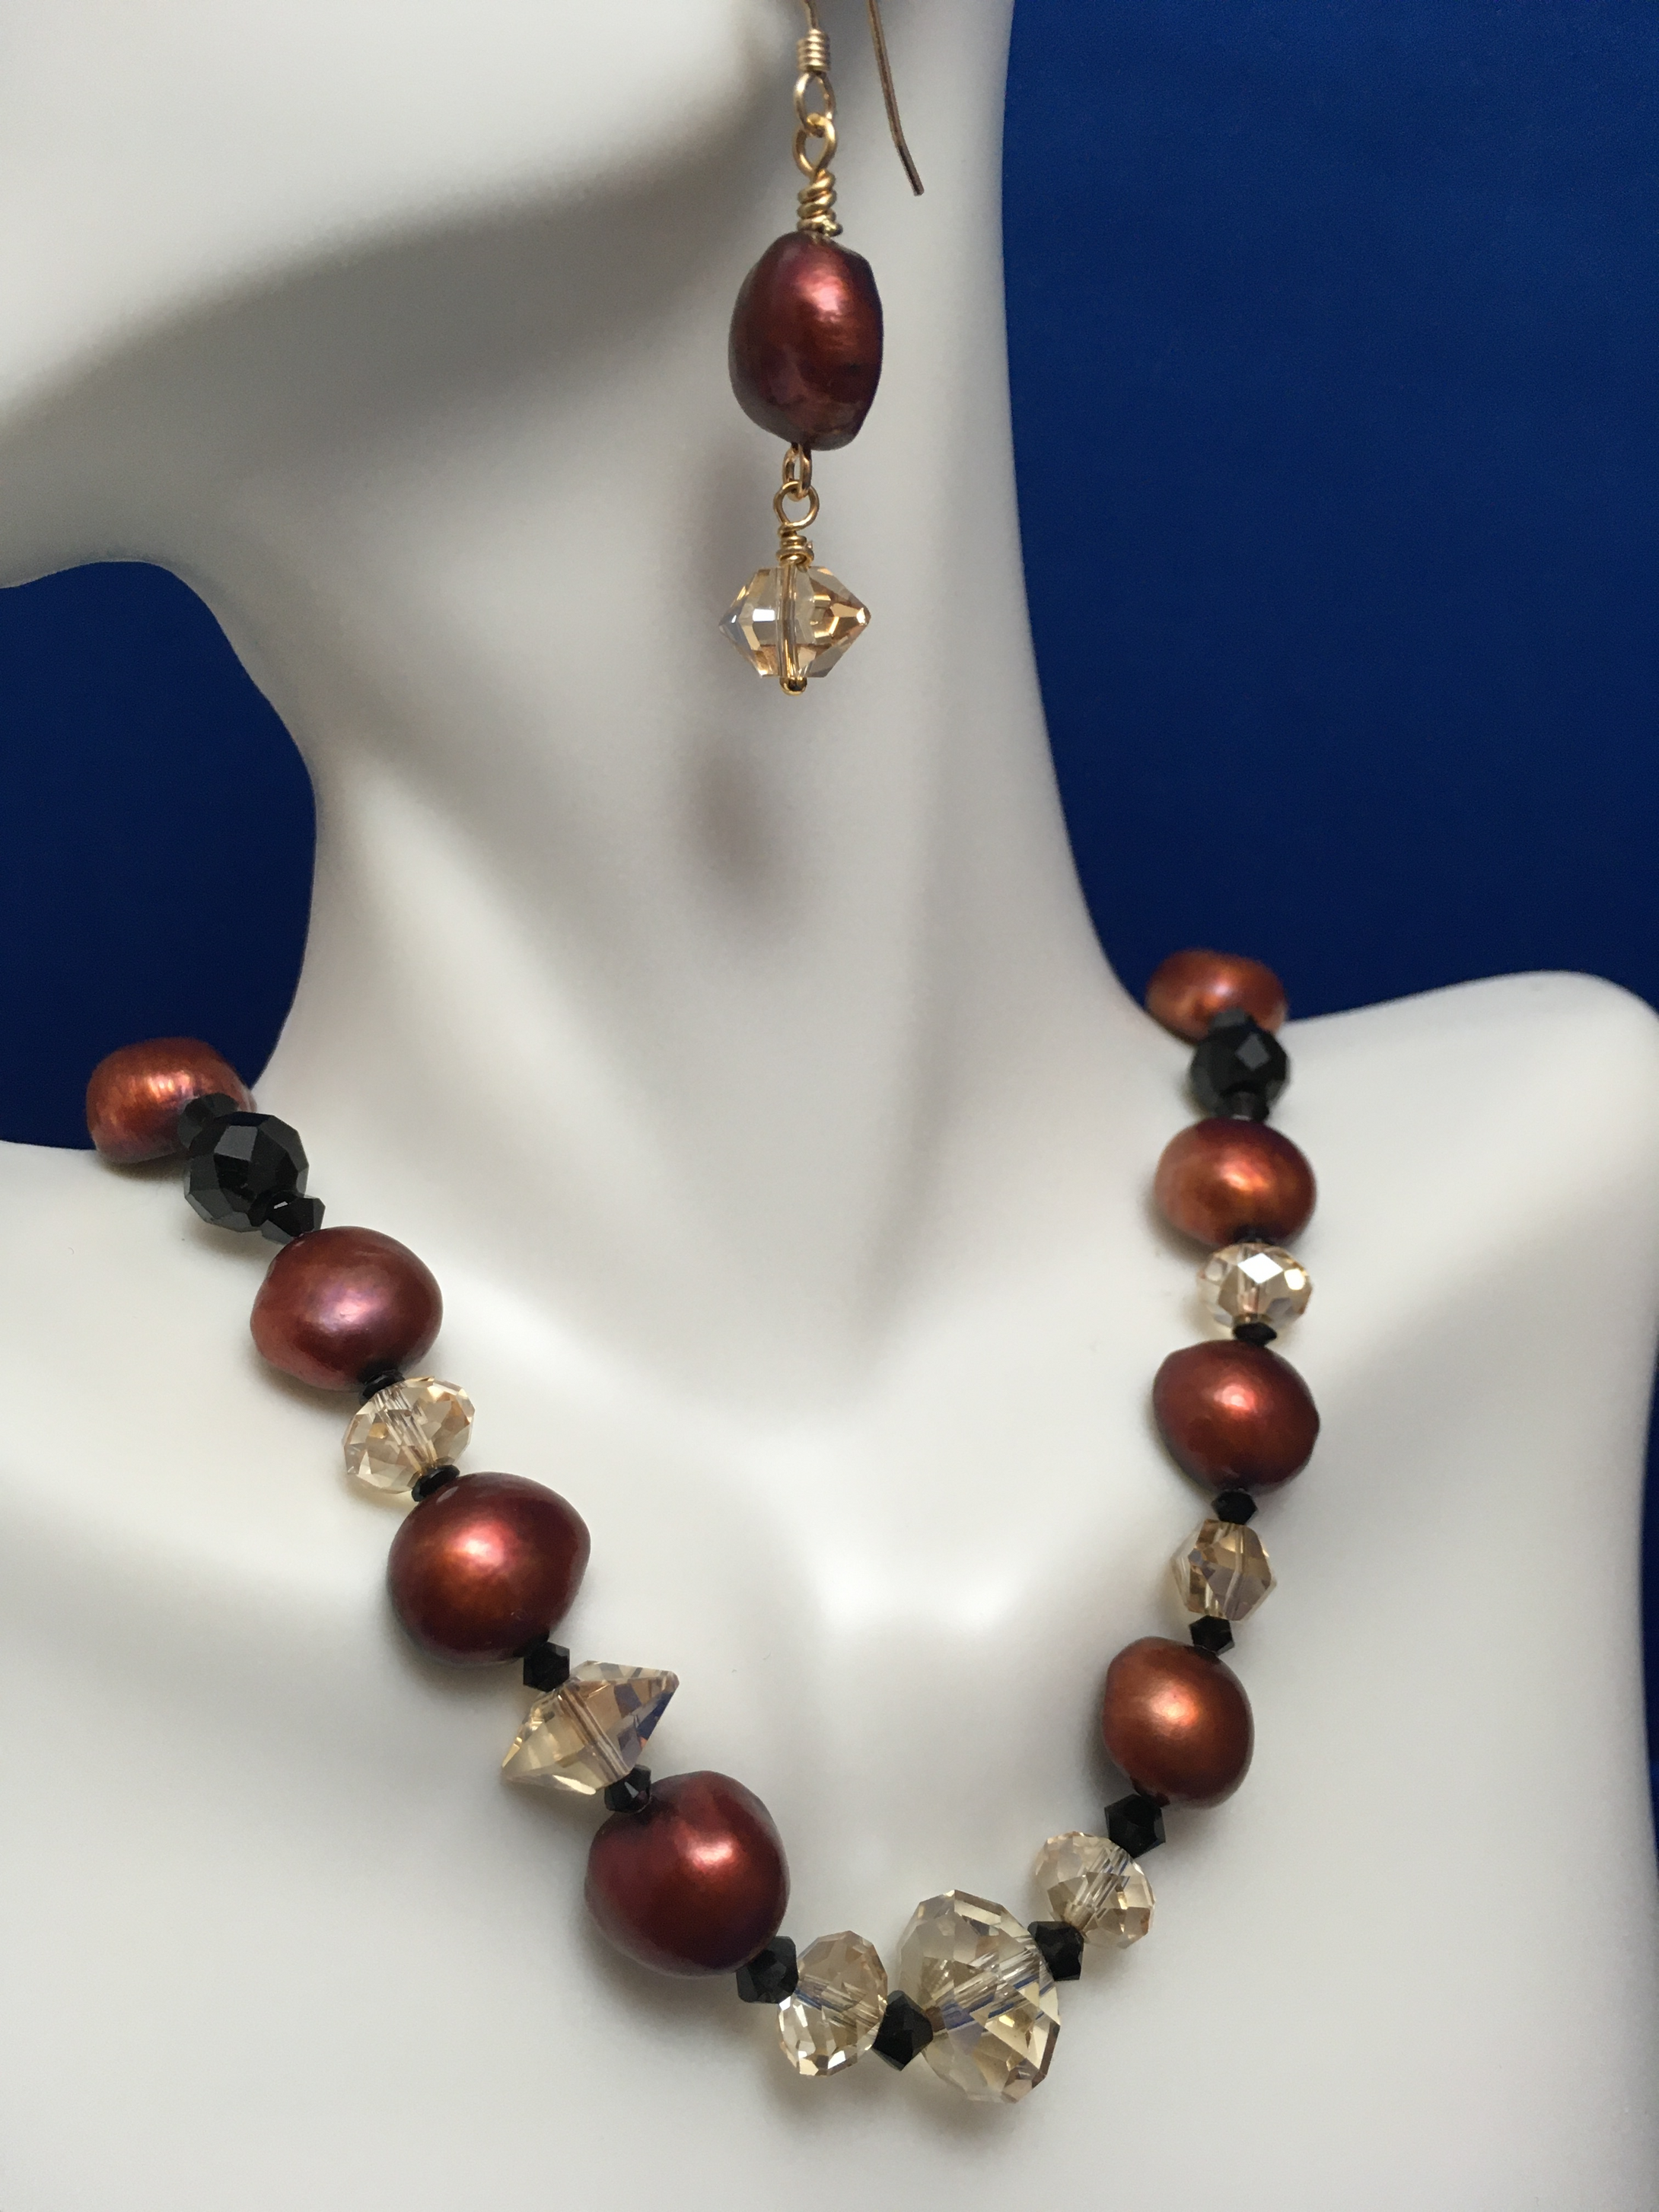 Raspberry FW Pearls, Complimentary Crystals with Black Beads  17 1/2